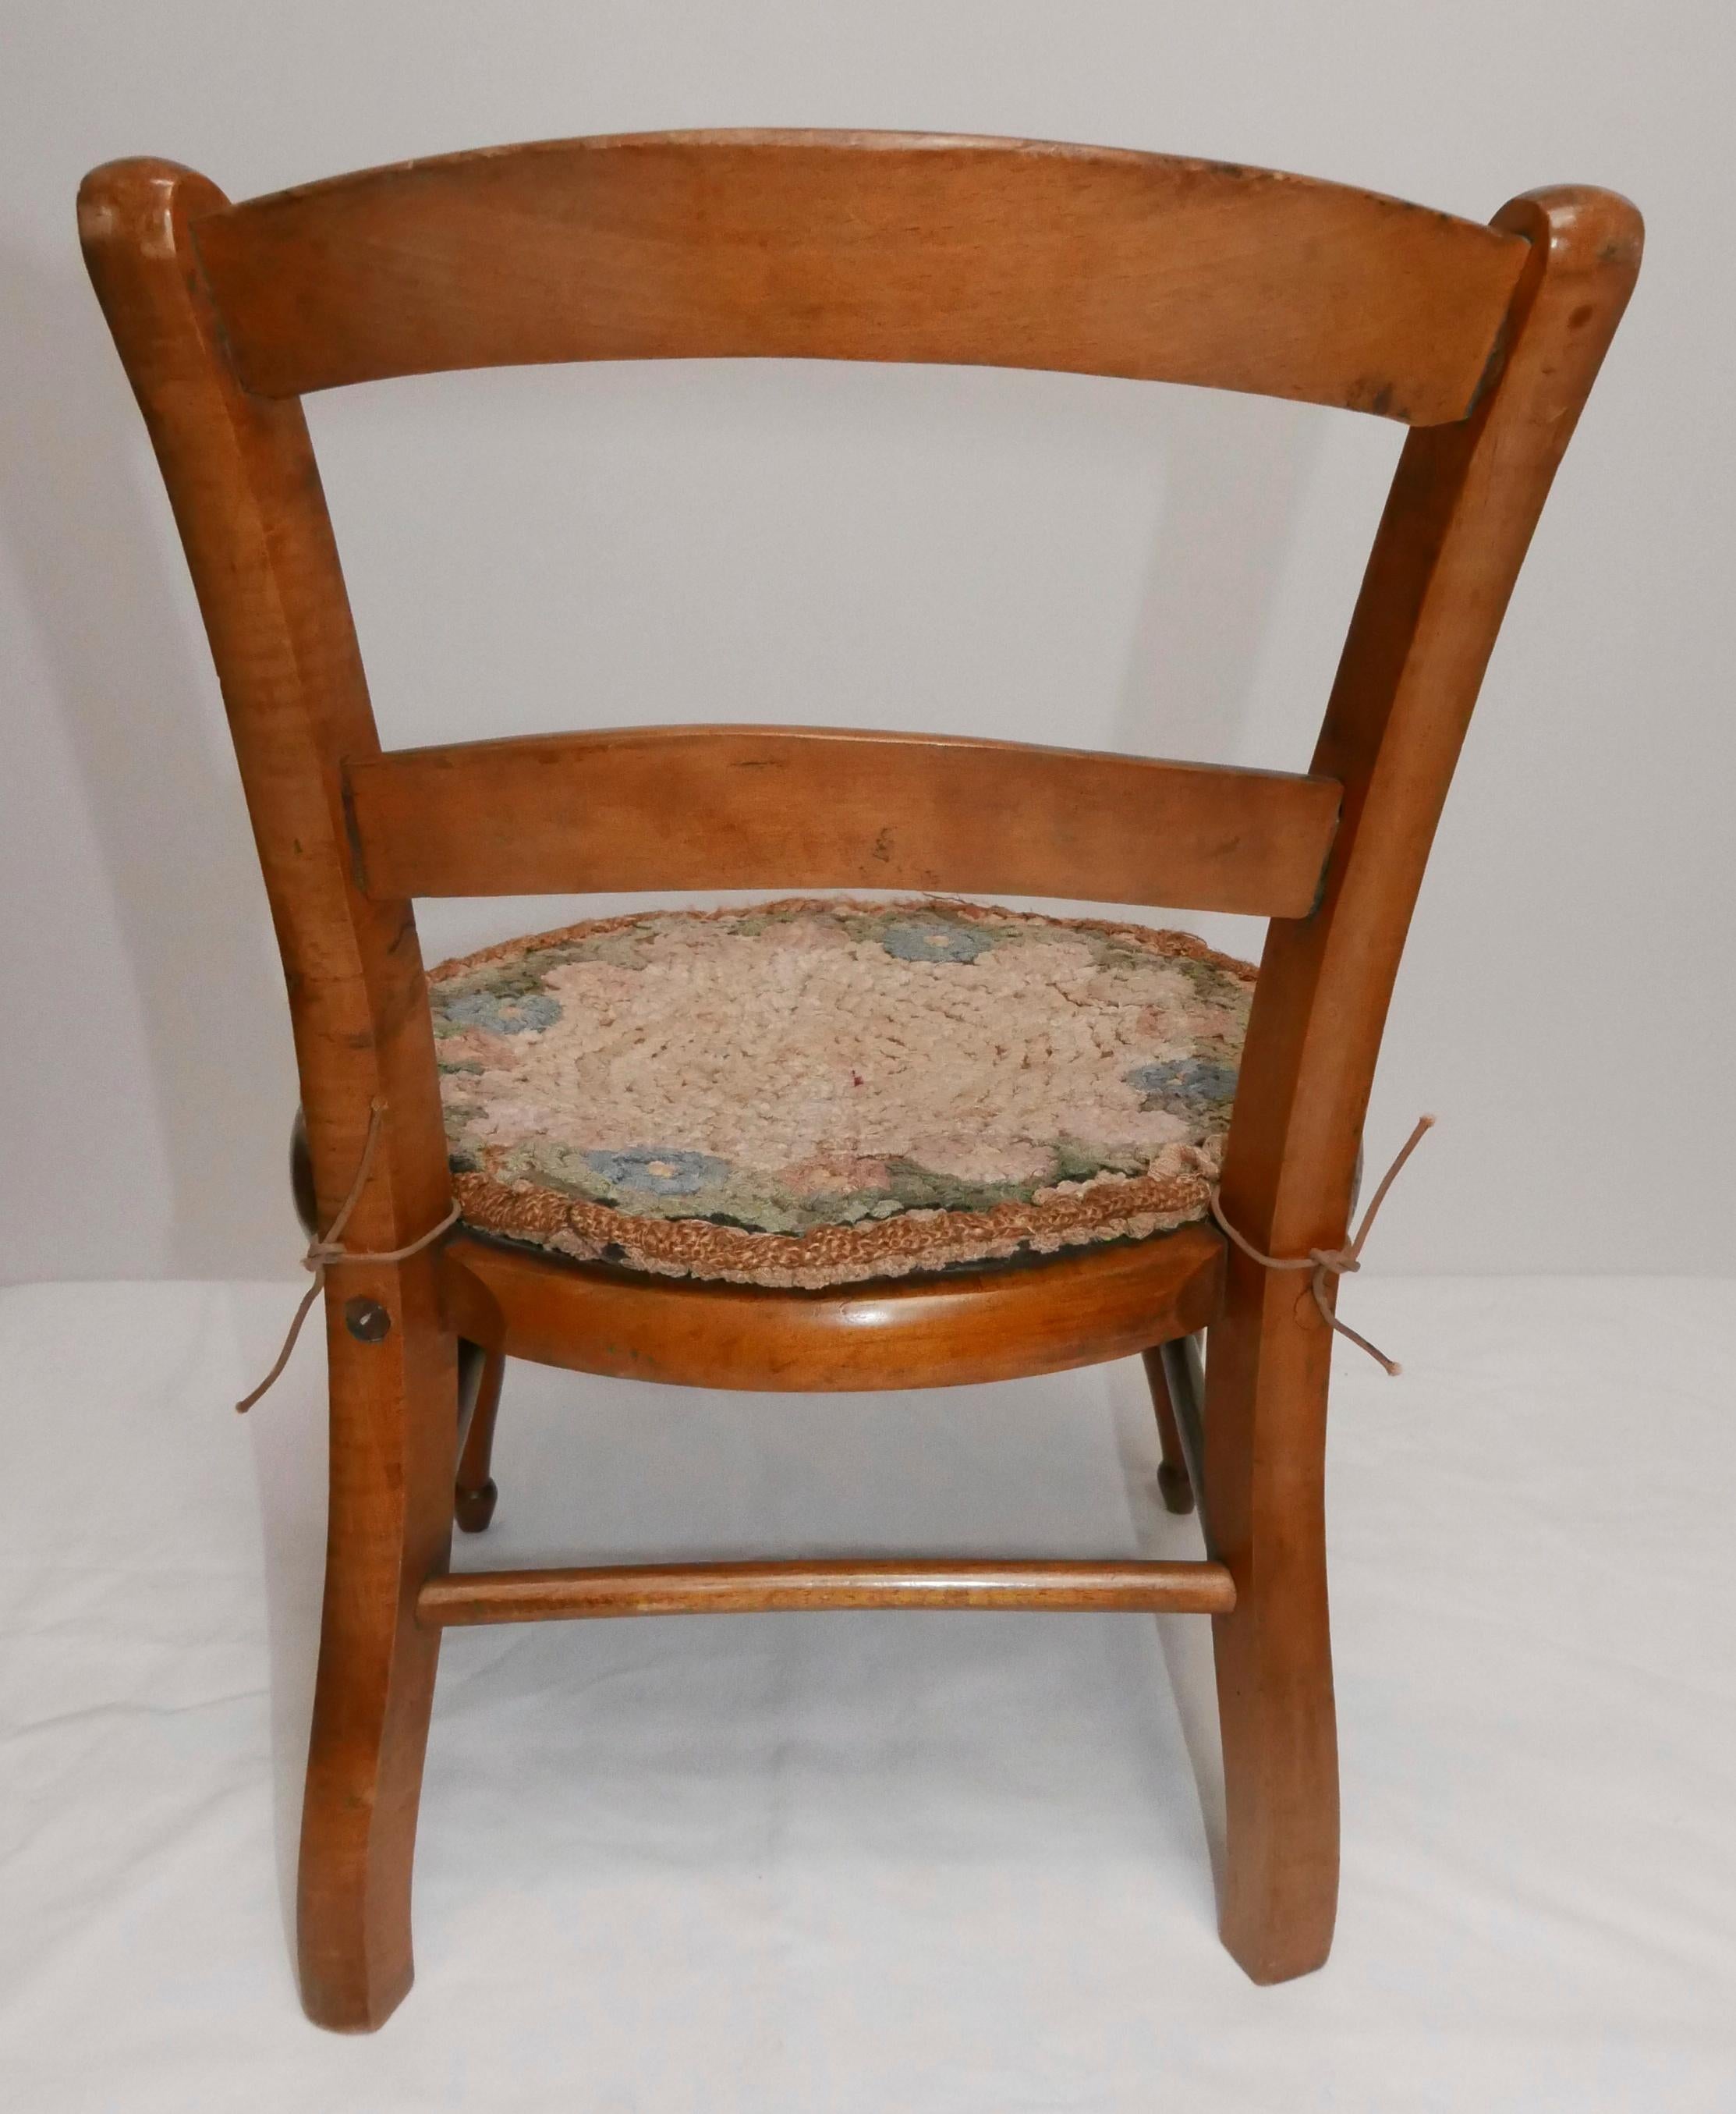 Primitive American Curly Maple Child's Chair, circa 1870 For Sale